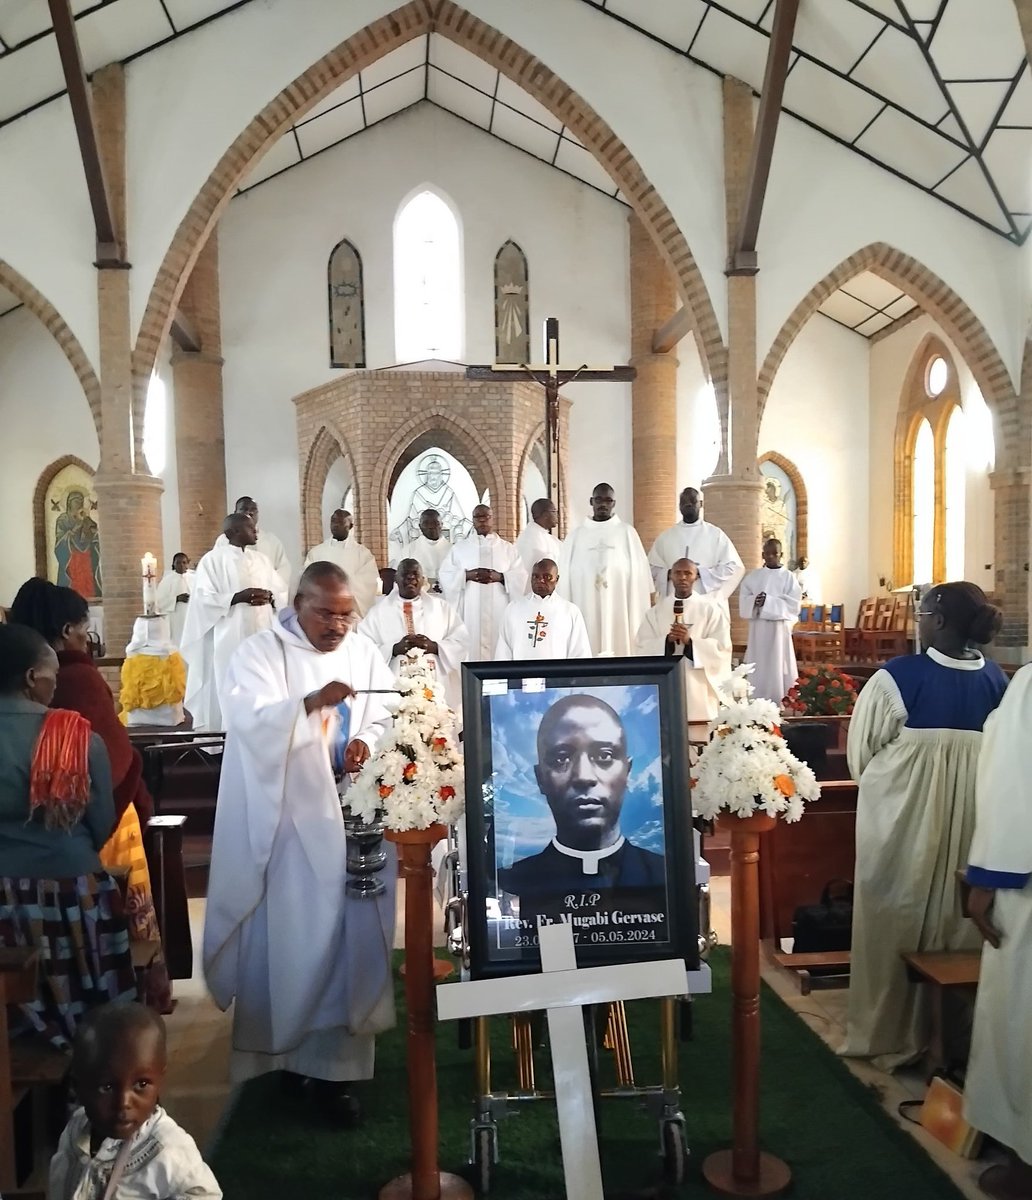 #HappeningNow: Receiving the body of Rev. Fr. Gervase Mugabi at Nyamitanga Cathedral & Mass, followed by Body viewing and silent prayer thereafter the body will be taken for vigil mass at Nyamitanga Administration Chapel
 MAY HIS SOUL REST IN PEACE | | RIP
 
OHUMURE OMUBUSIGYE 🕊